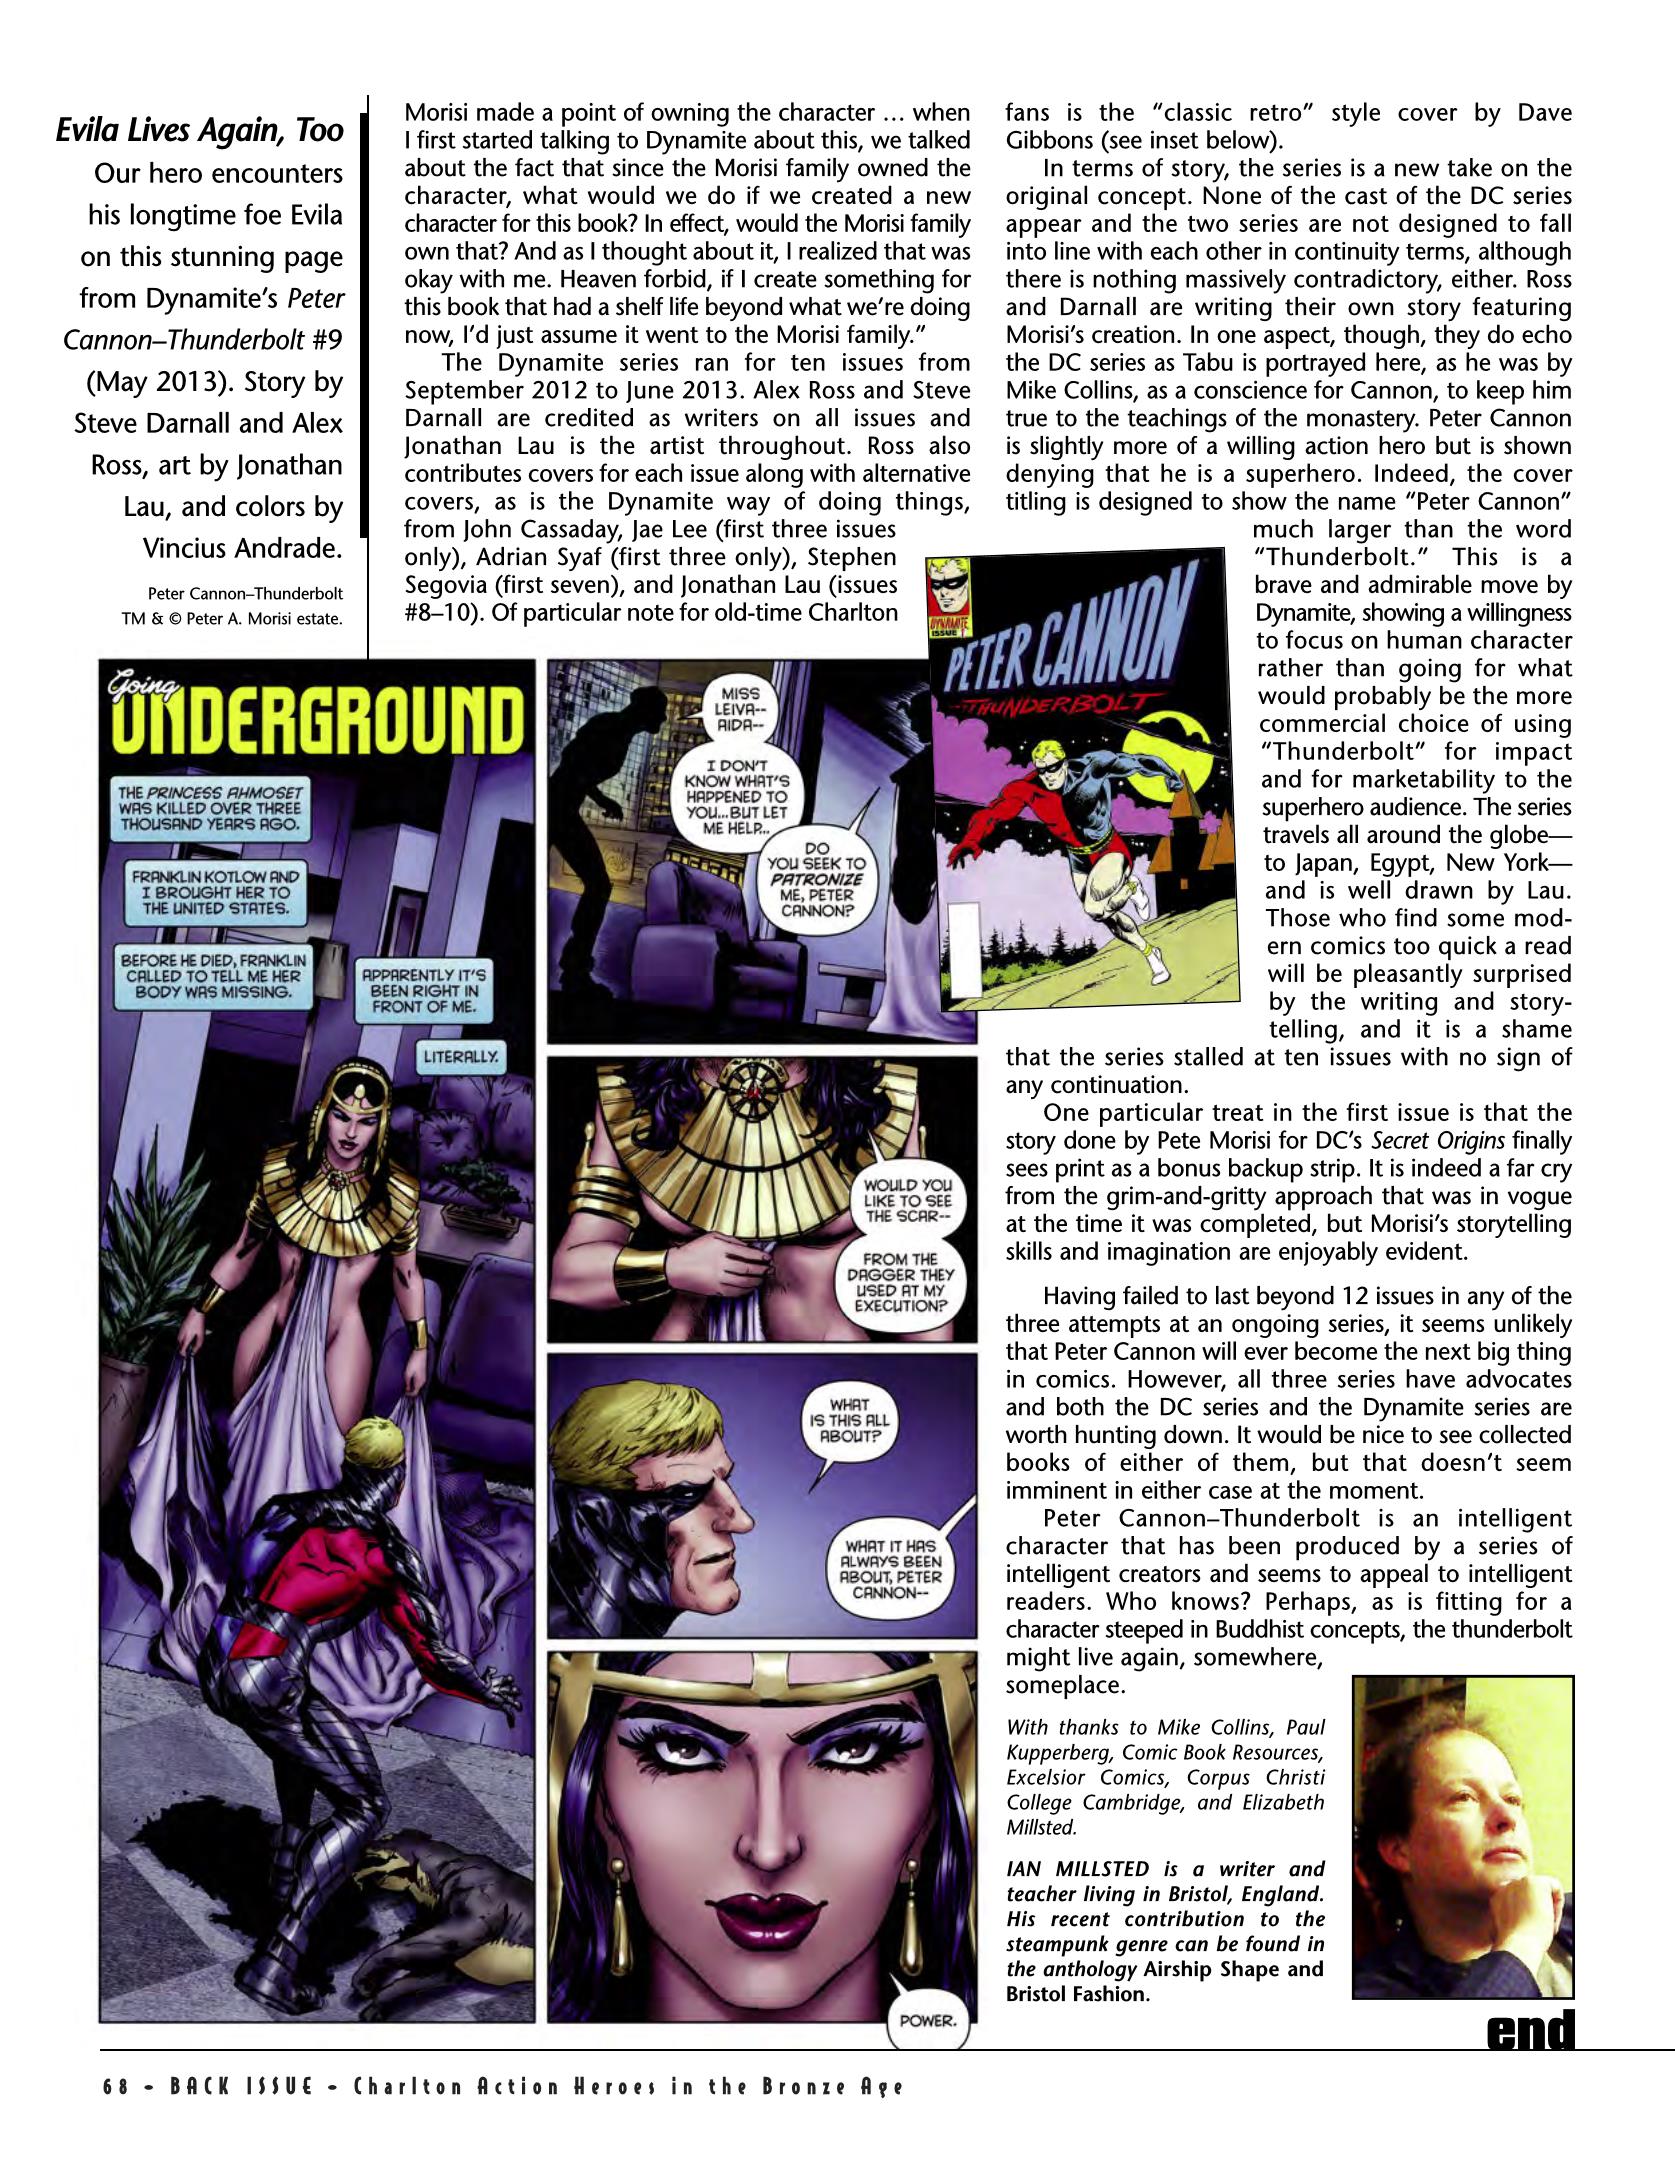 Read online Back Issue comic -  Issue #79 - 70